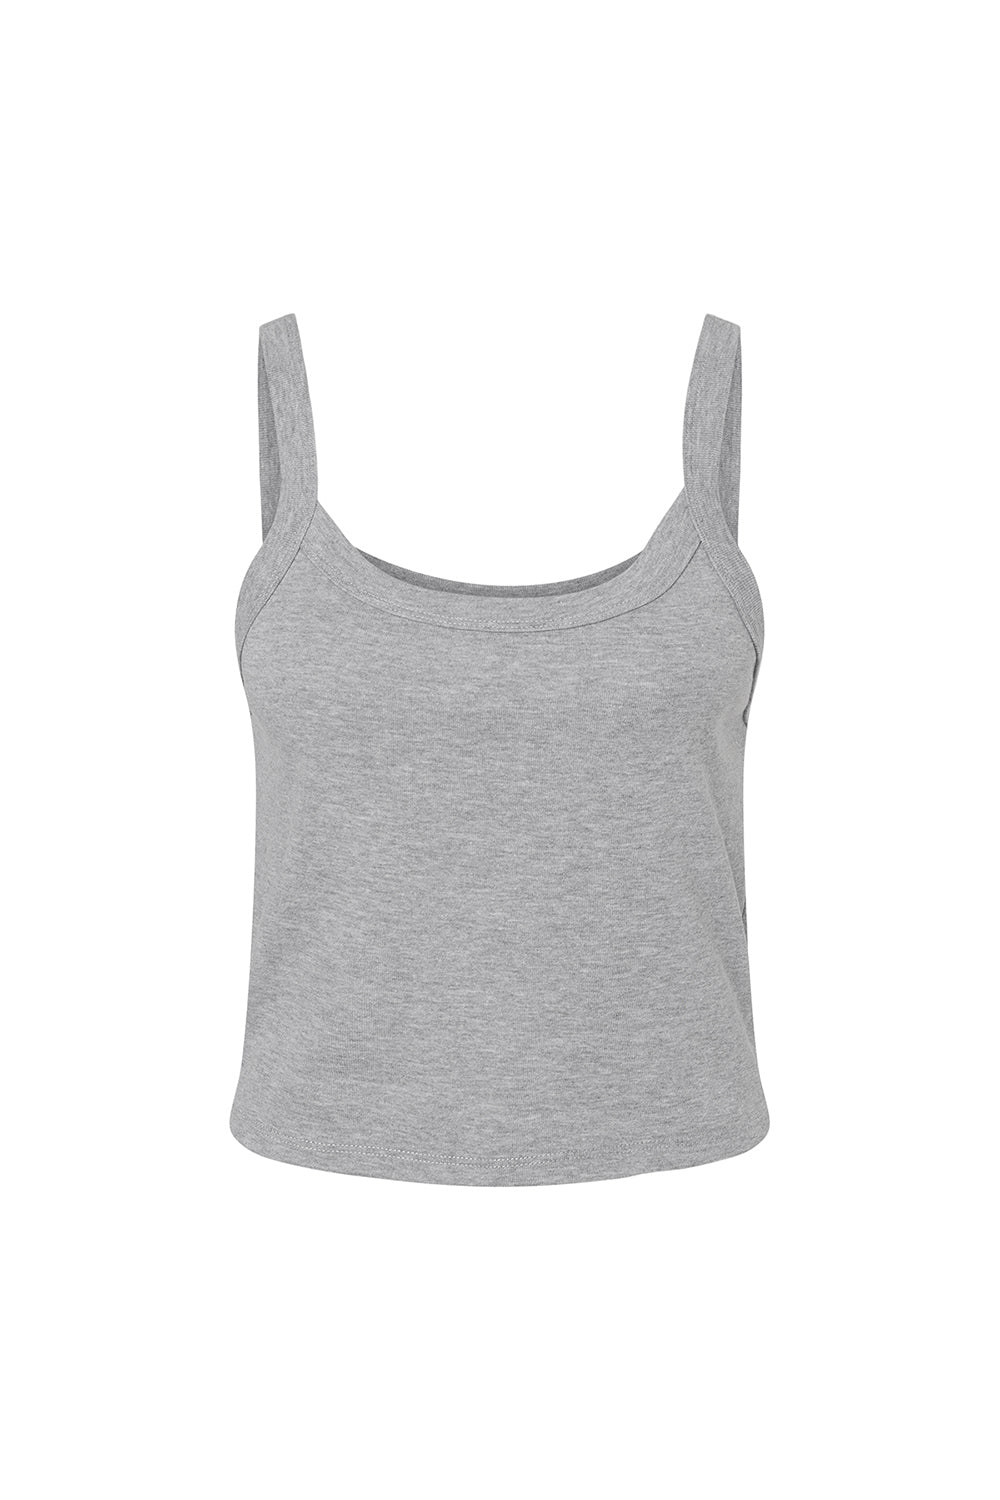 Bella + Canvas 1012BE Womens Micro Ribbed Scoop Tank Top Heather Grey Flat Front